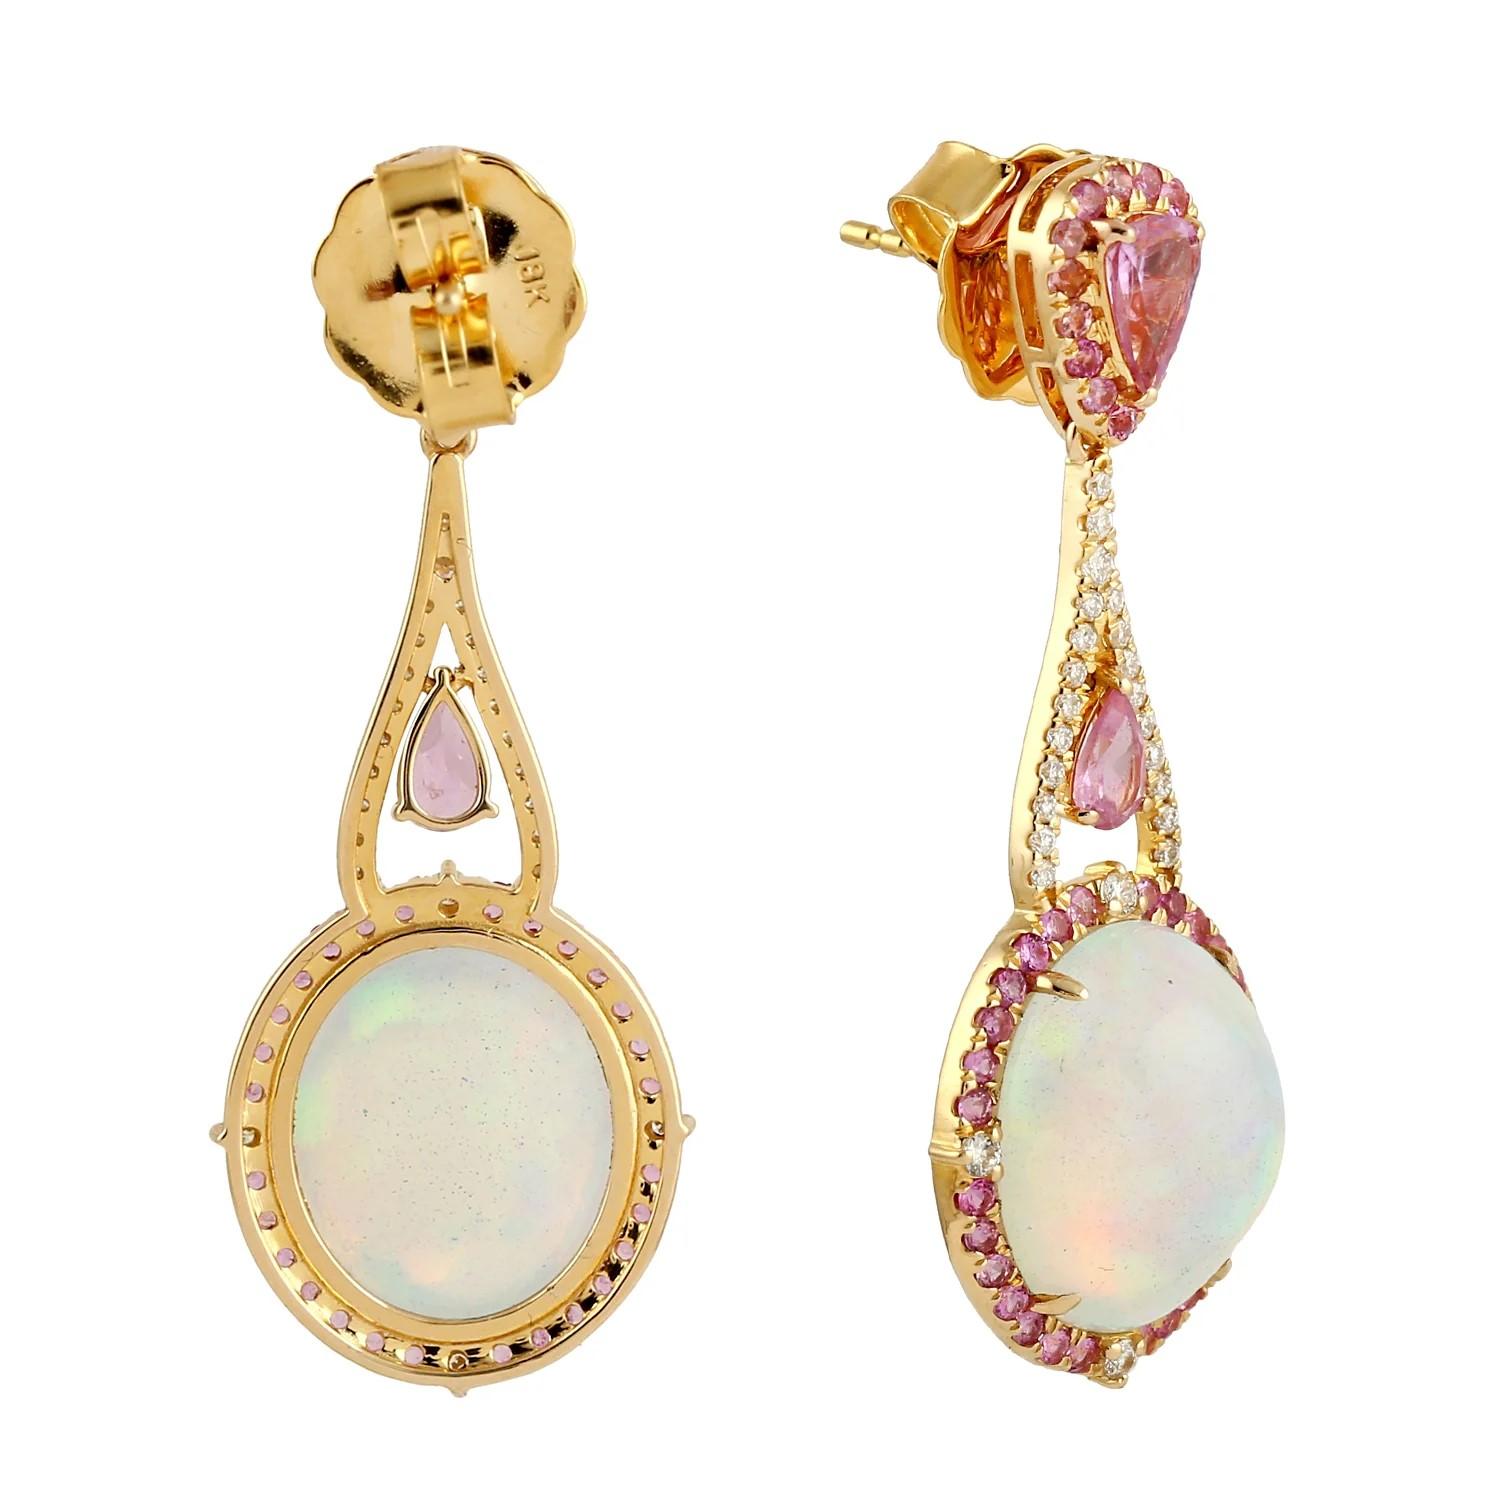 Cast in 18 karat gold. These stud earrings are hand set in 9.15 carats Ethiopian opal, 2.5 carats pink sapphire and .38 carats of sparkling diamonds. 

FOLLOW MEGHNA JEWELS storefront to view the latest collection & exclusive pieces. Meghna Jewels